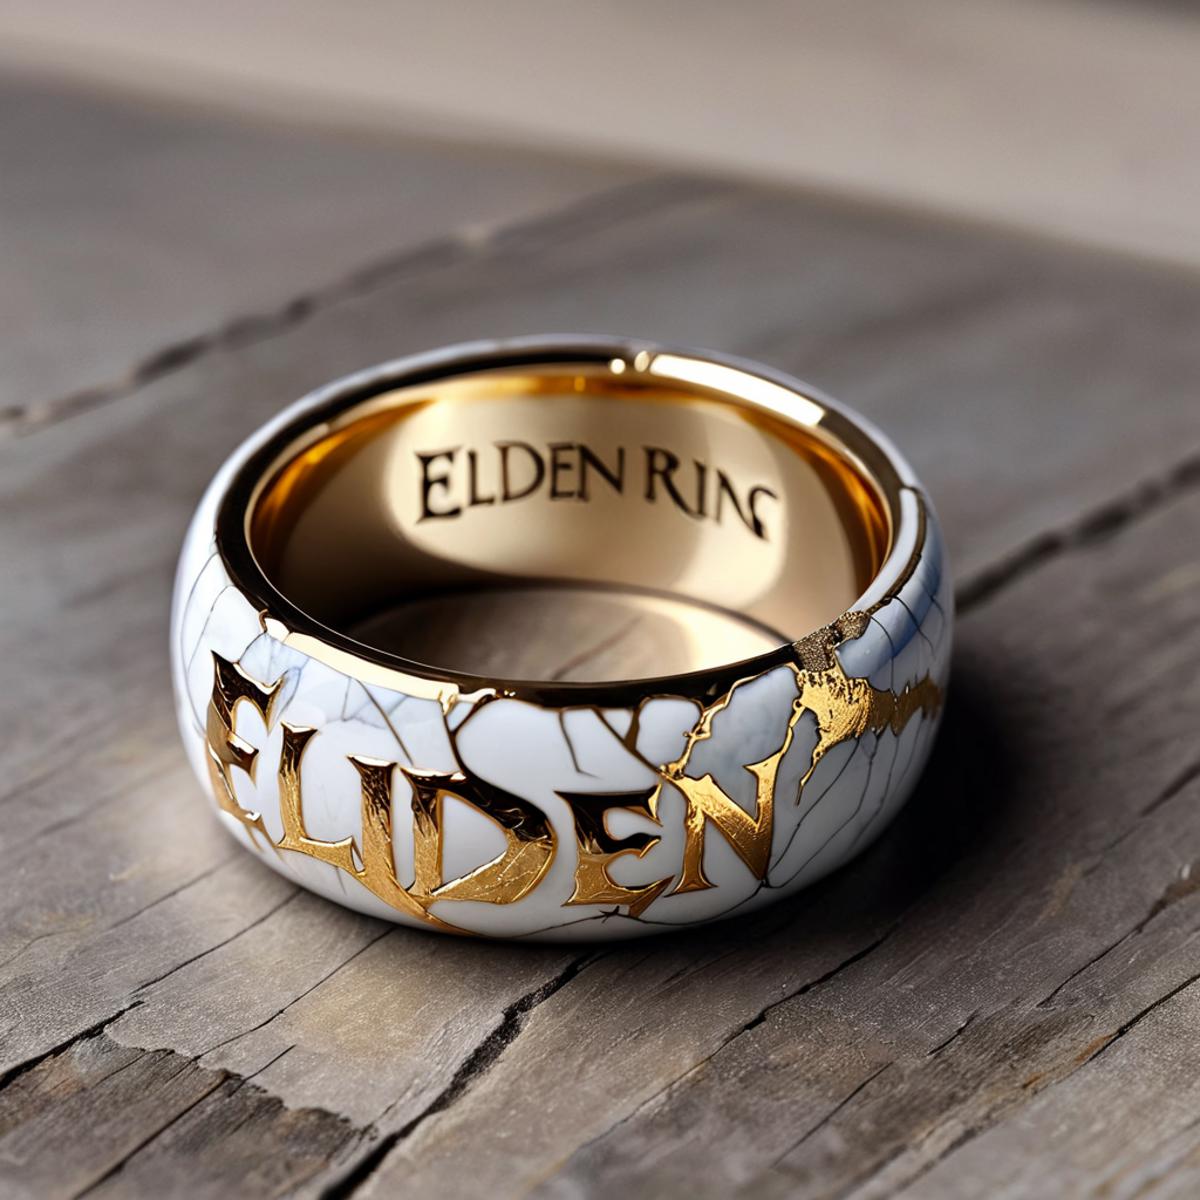 A gold and white ring with the word "Elden" written on it.